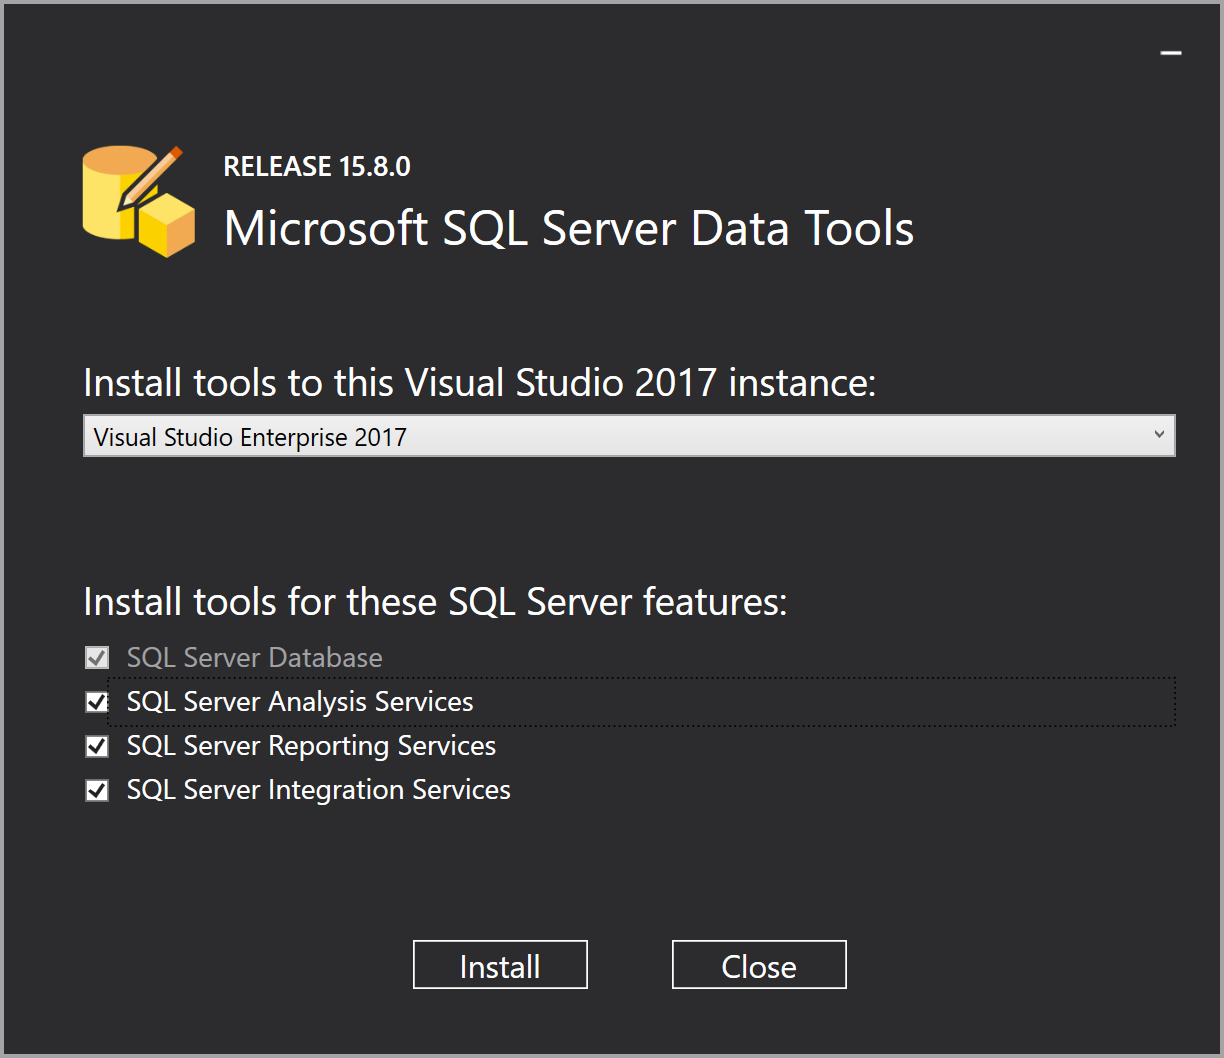 Can We Install Sql Server 2008 After Visual Studio 2015?